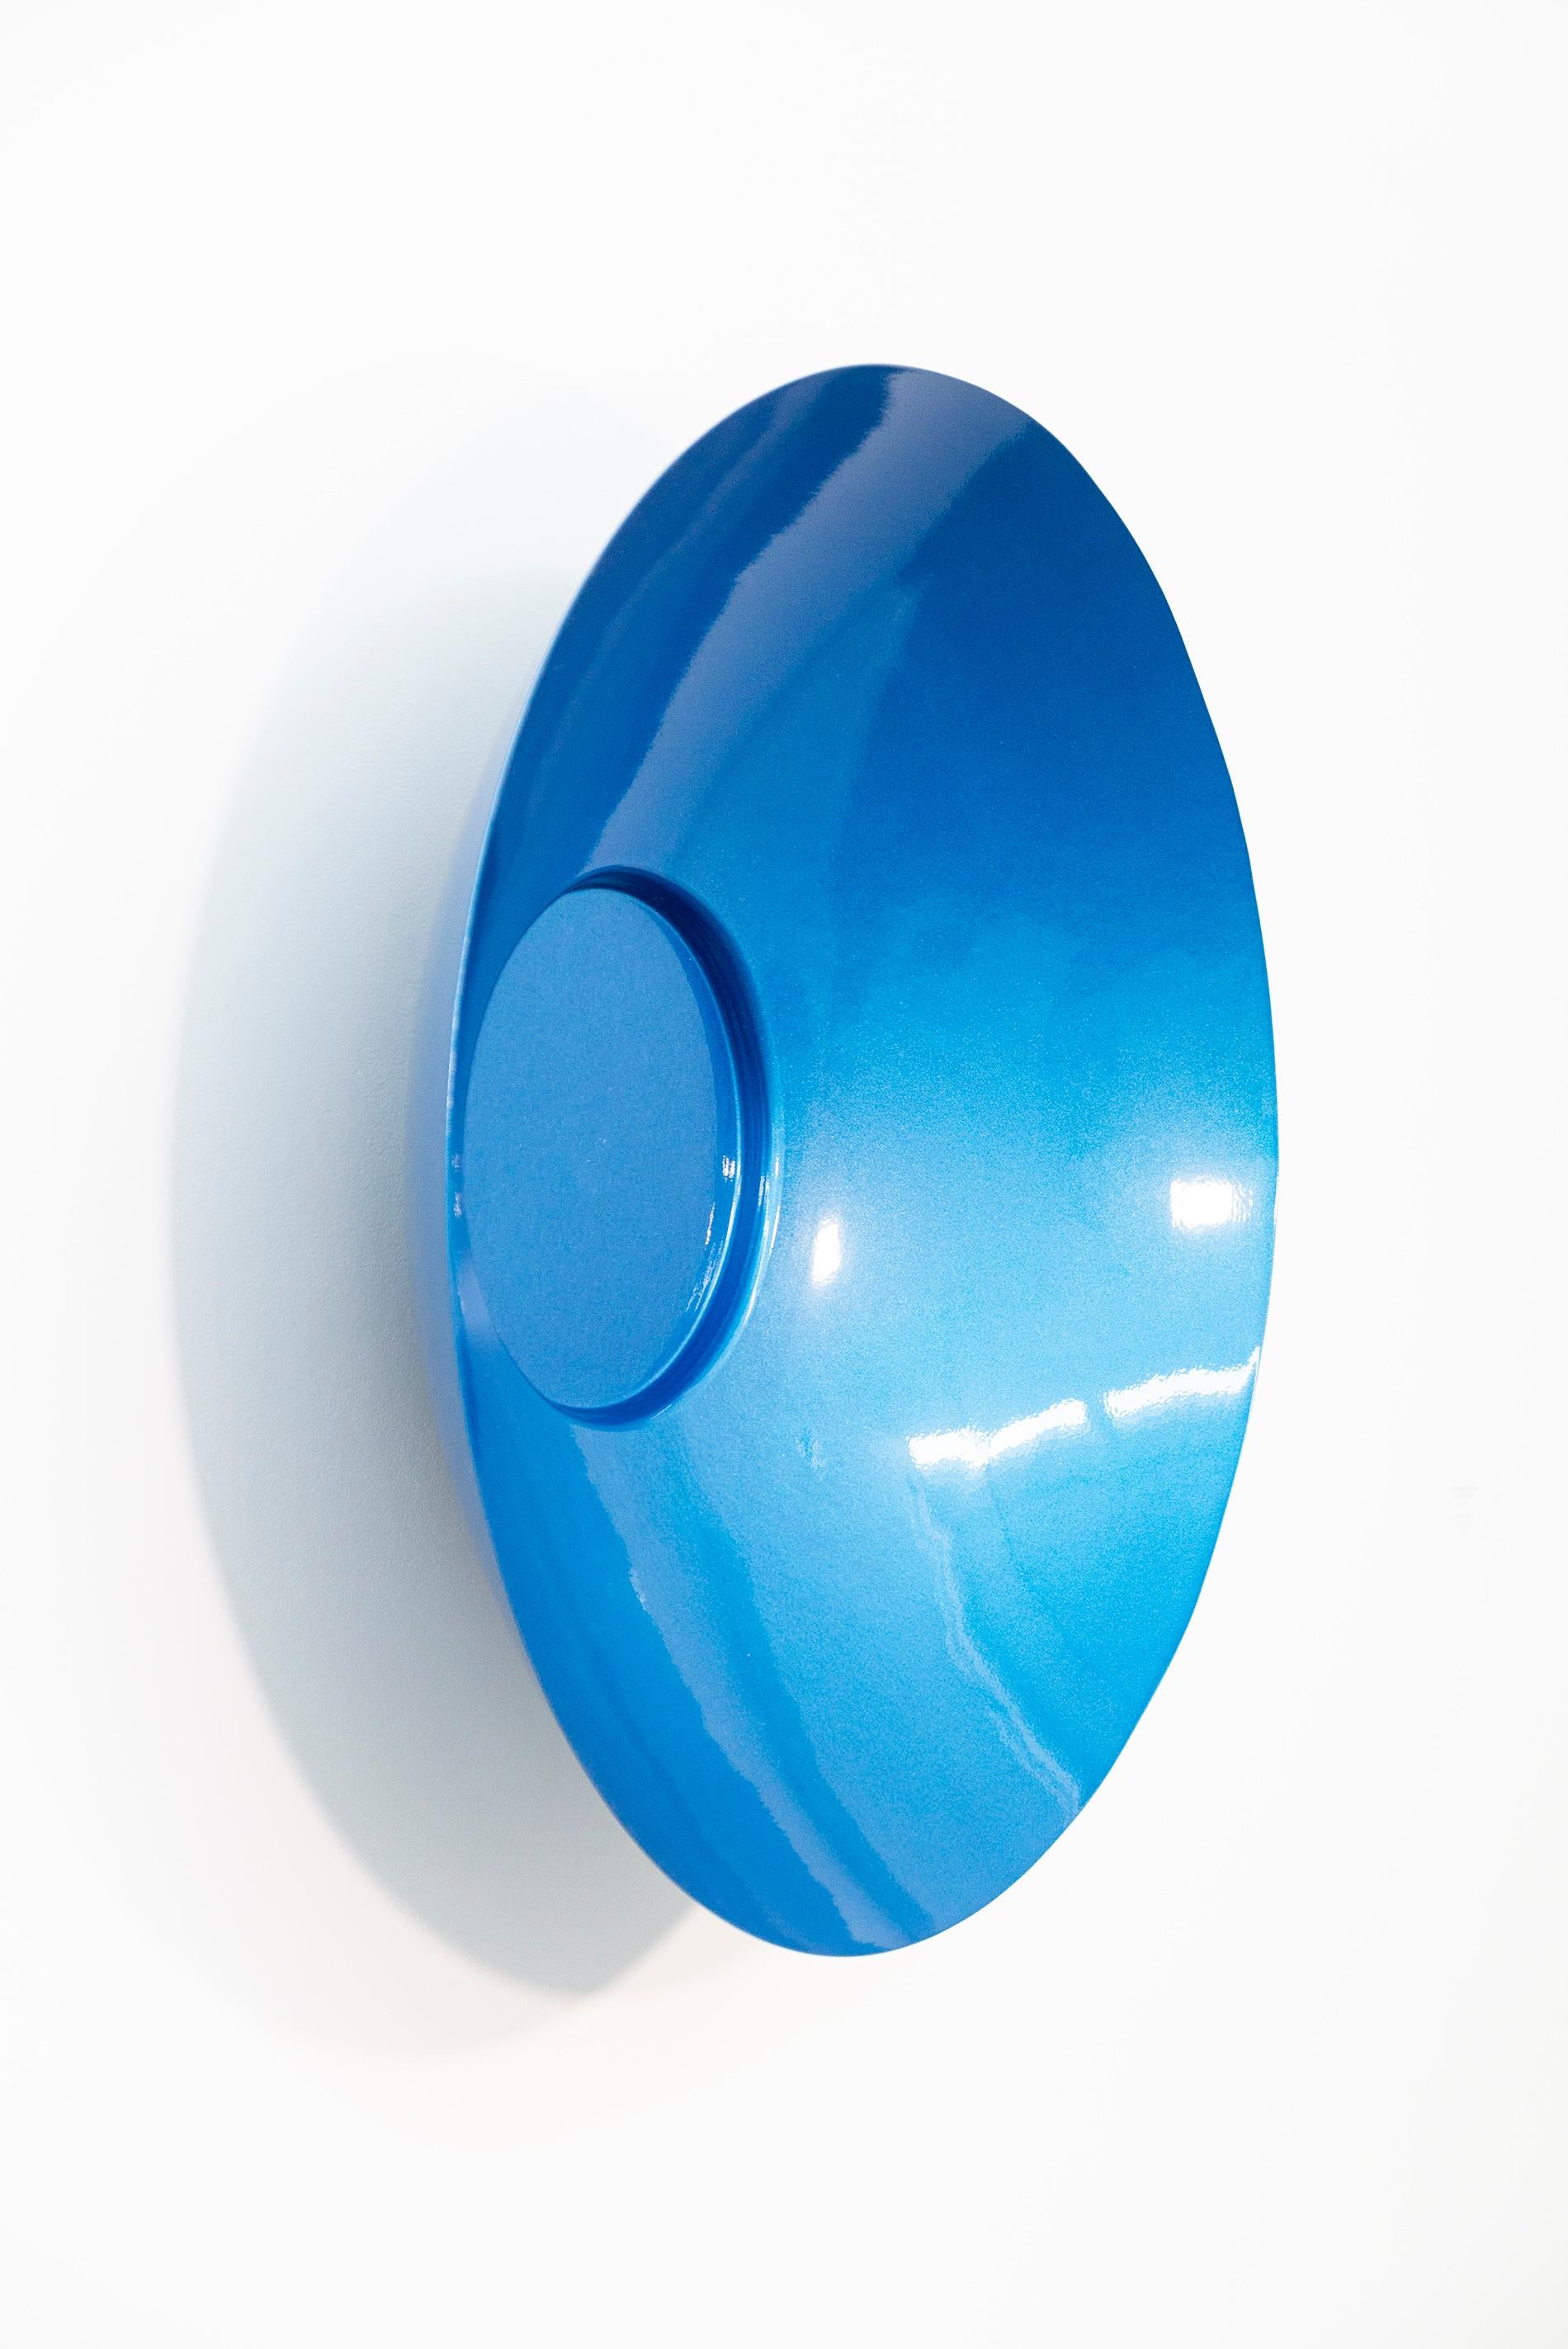 Singing Vessel Atlantic Blue 32 - circular, contemporary, steel wall sculpture - Abstract Geometric Sculpture by Marlene Hilton Moore